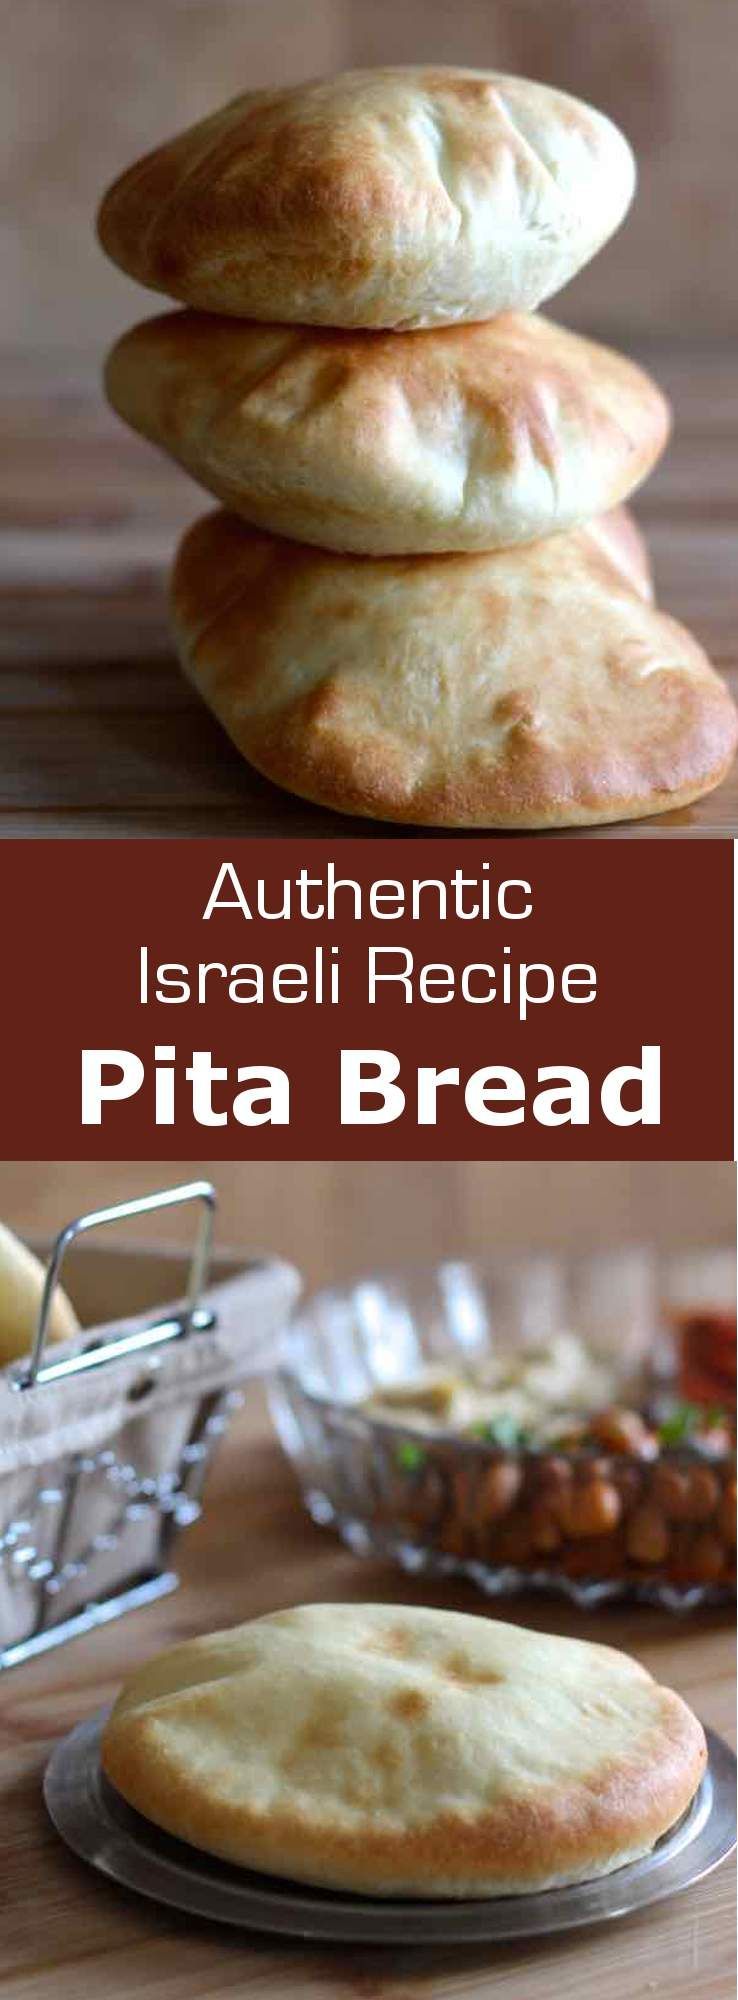 Pita bread is a soft and thin flat bread, consumed in the Near East and Middle East as well as in Southern